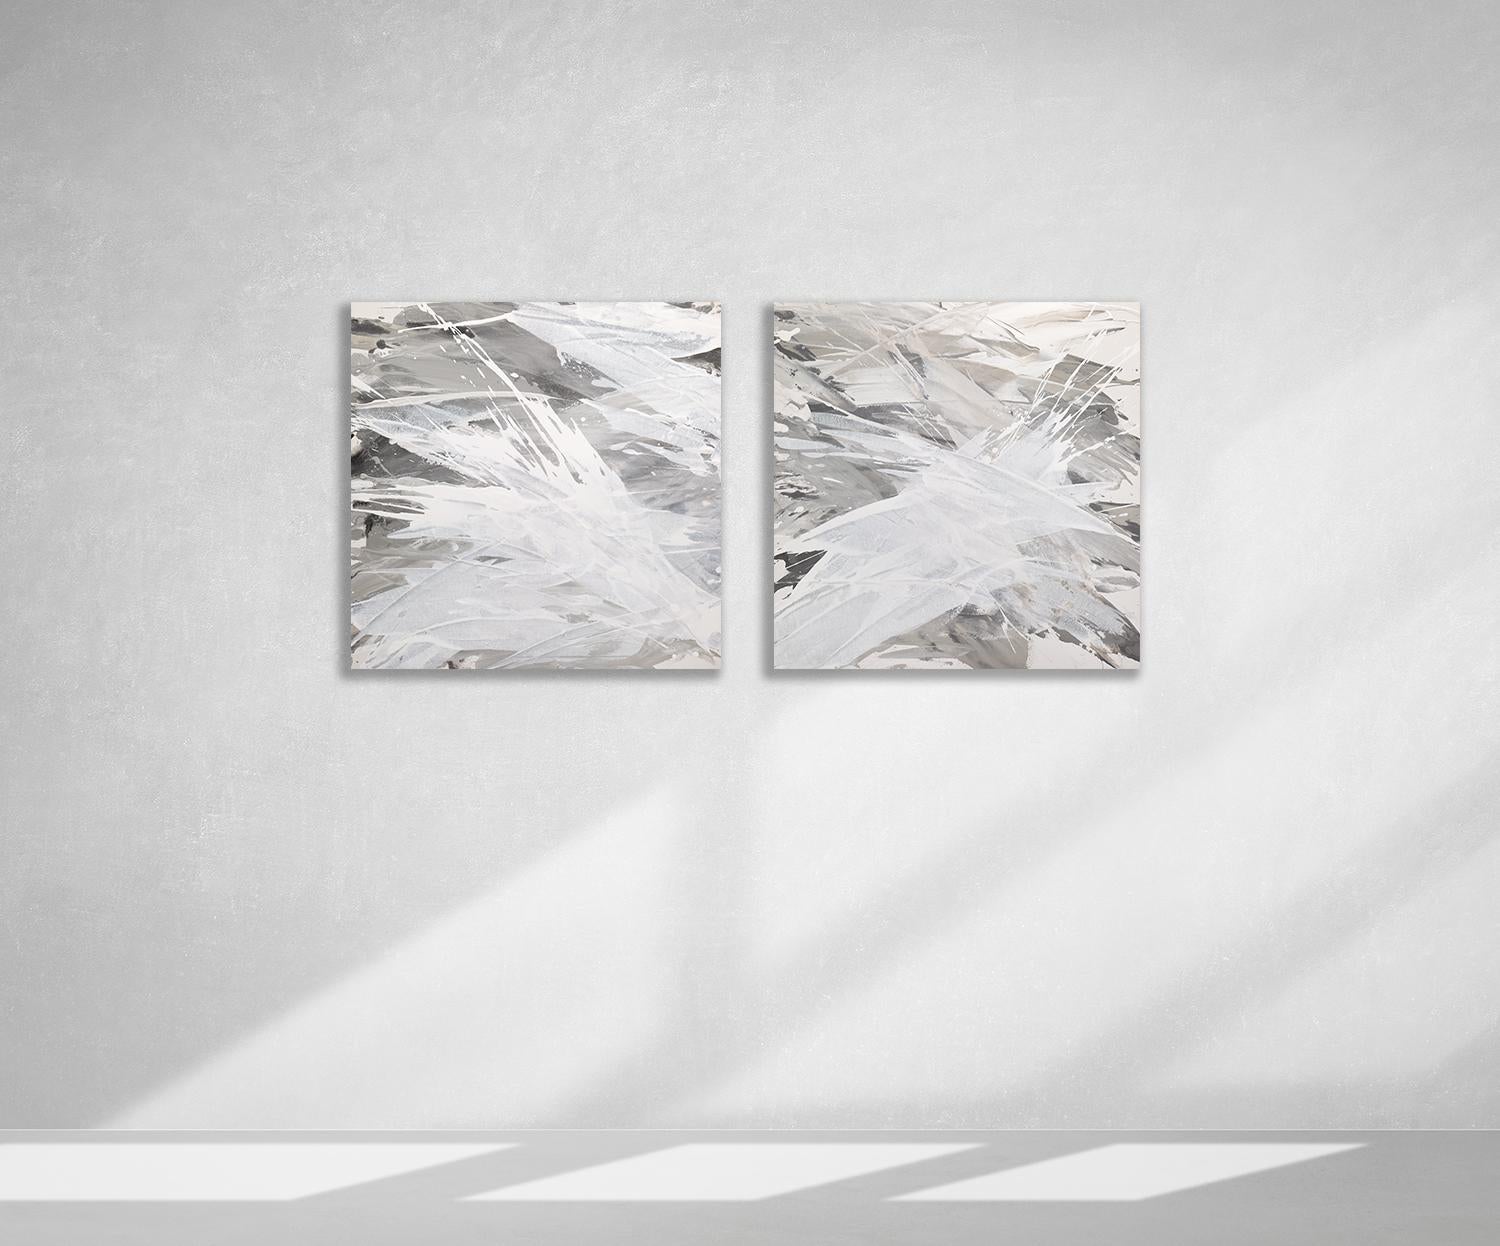 This abstract diptych by Teodora Guererra is comprised of two gallery wrapped canvases, 30